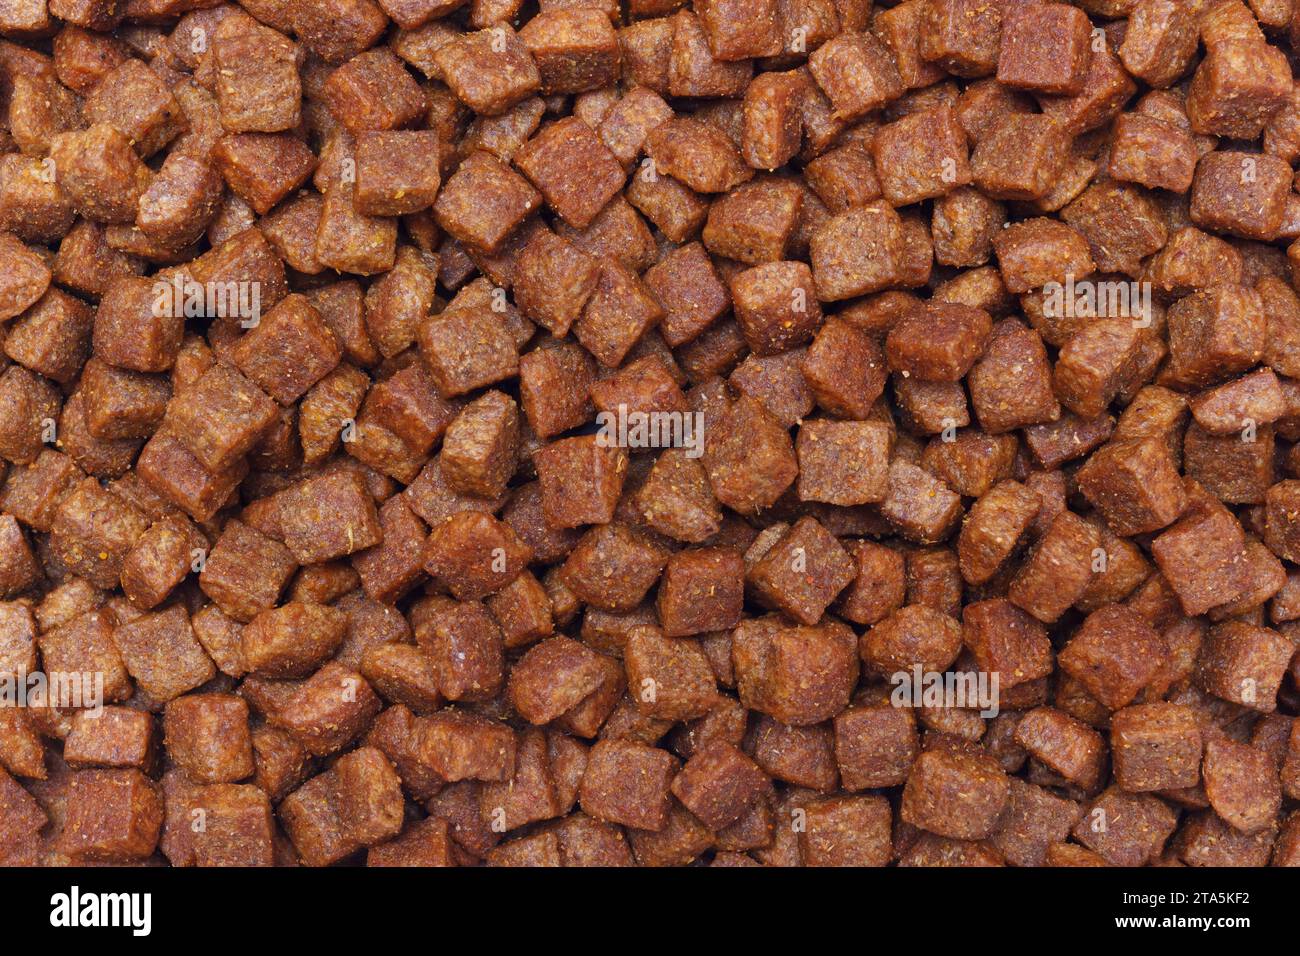 The Dried Feed Nutriment For Pet. Granulated Mix Of Vitamins And Proteins For Dogs And Cats. The Food For Domestic Animals. Macro Photography, Solid F Stock Photo